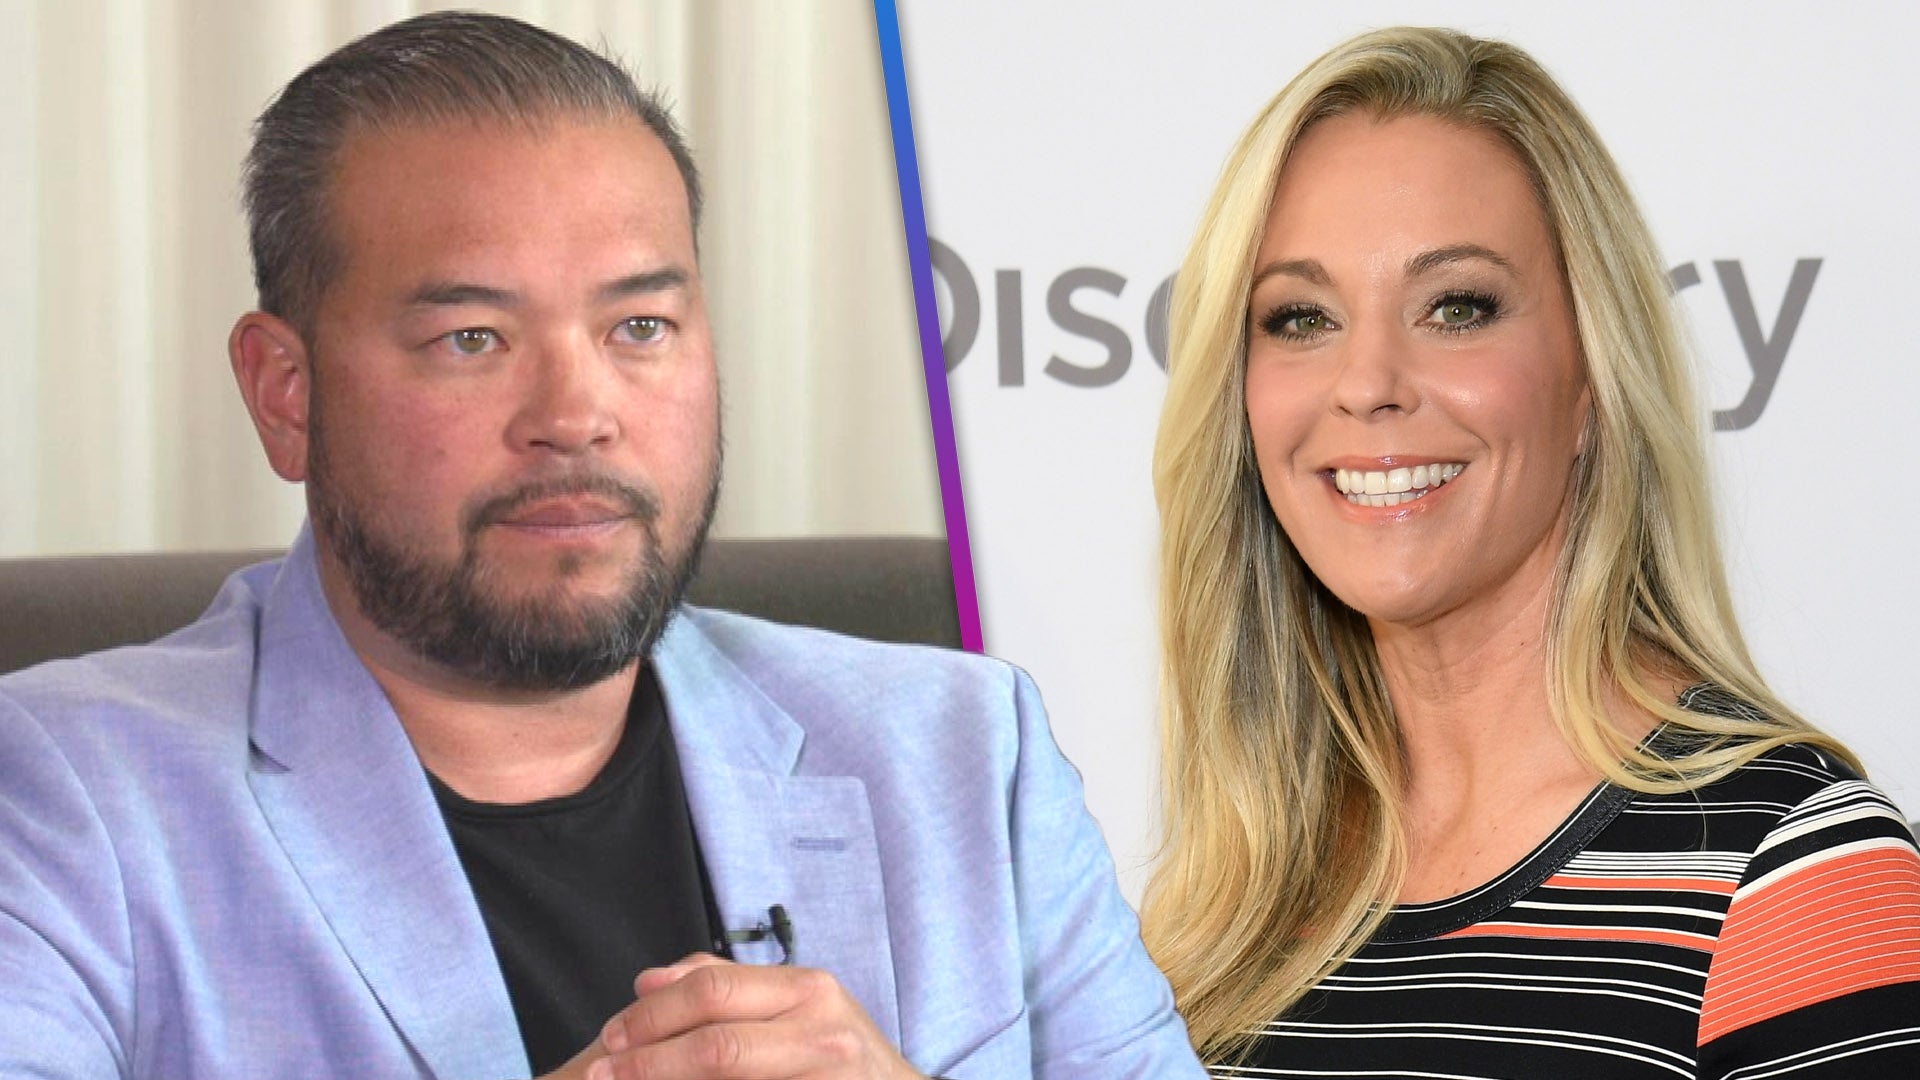 Jon Gosselin Wants a Reunion With Ex-Wife Kate and Family as He Reflects on Their Hit Show (Exclusive)